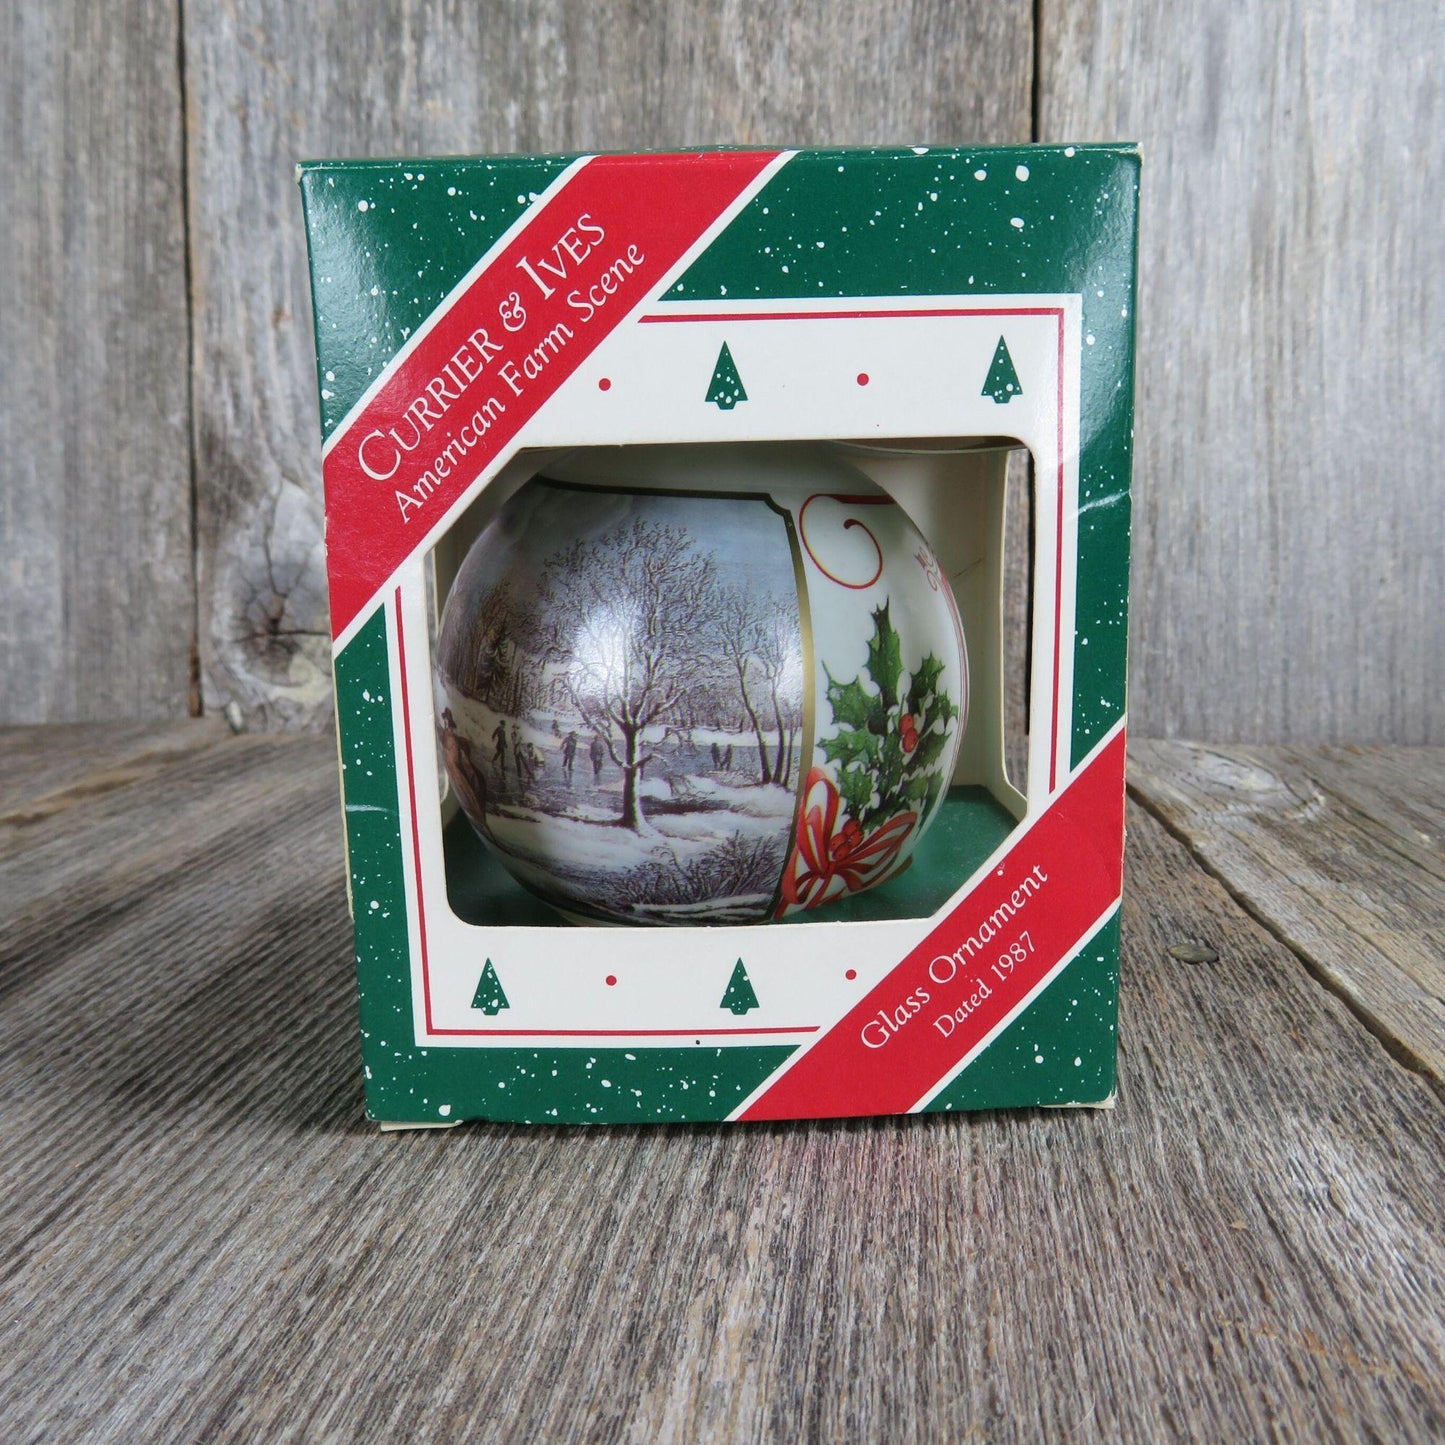 Vintage Currier and Ives Wrapped Glass Ball Ornament American Farm Scene Hallmark 1987